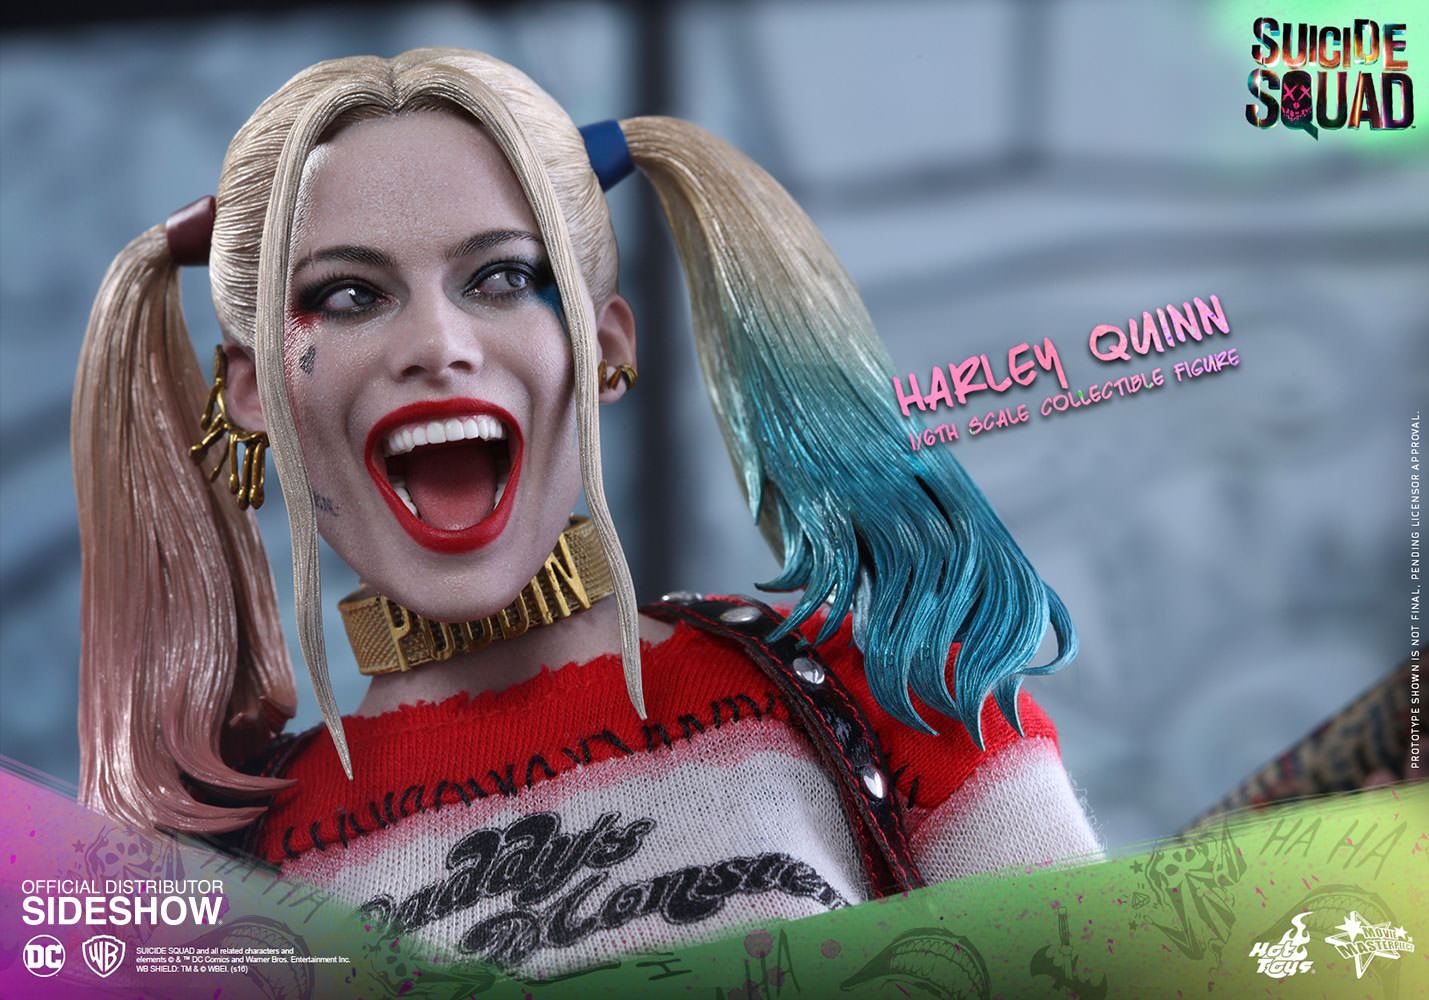 Harley Quinn Sixth Scale Figure by Hot Toys